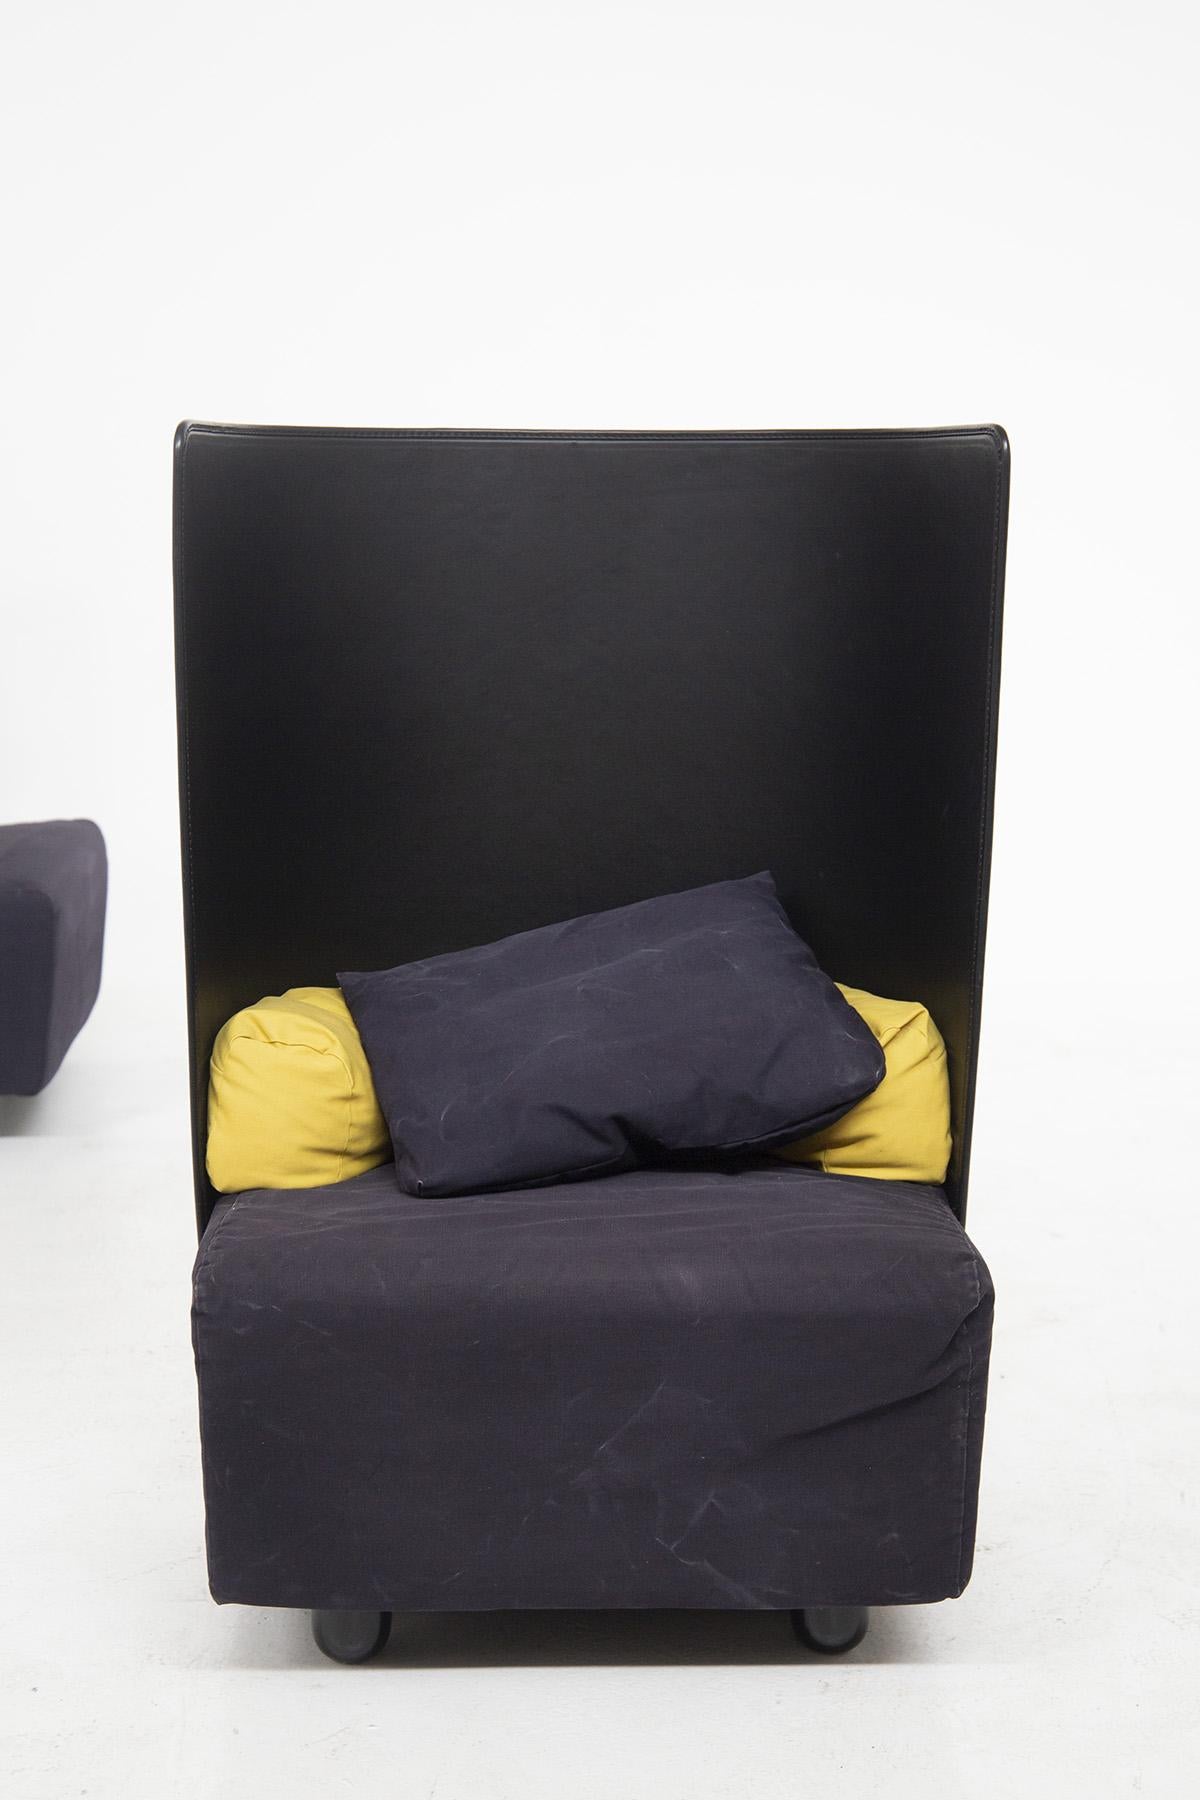 Attractive pair of armchairs made in the 1980s by De Pas, D'urbino and Zanotta, of fine Italian manufacture.
The armchairs have a curved back in black plastic material, very eccentric.
There are 4 cylindrical support feet, also black.
The armchairs